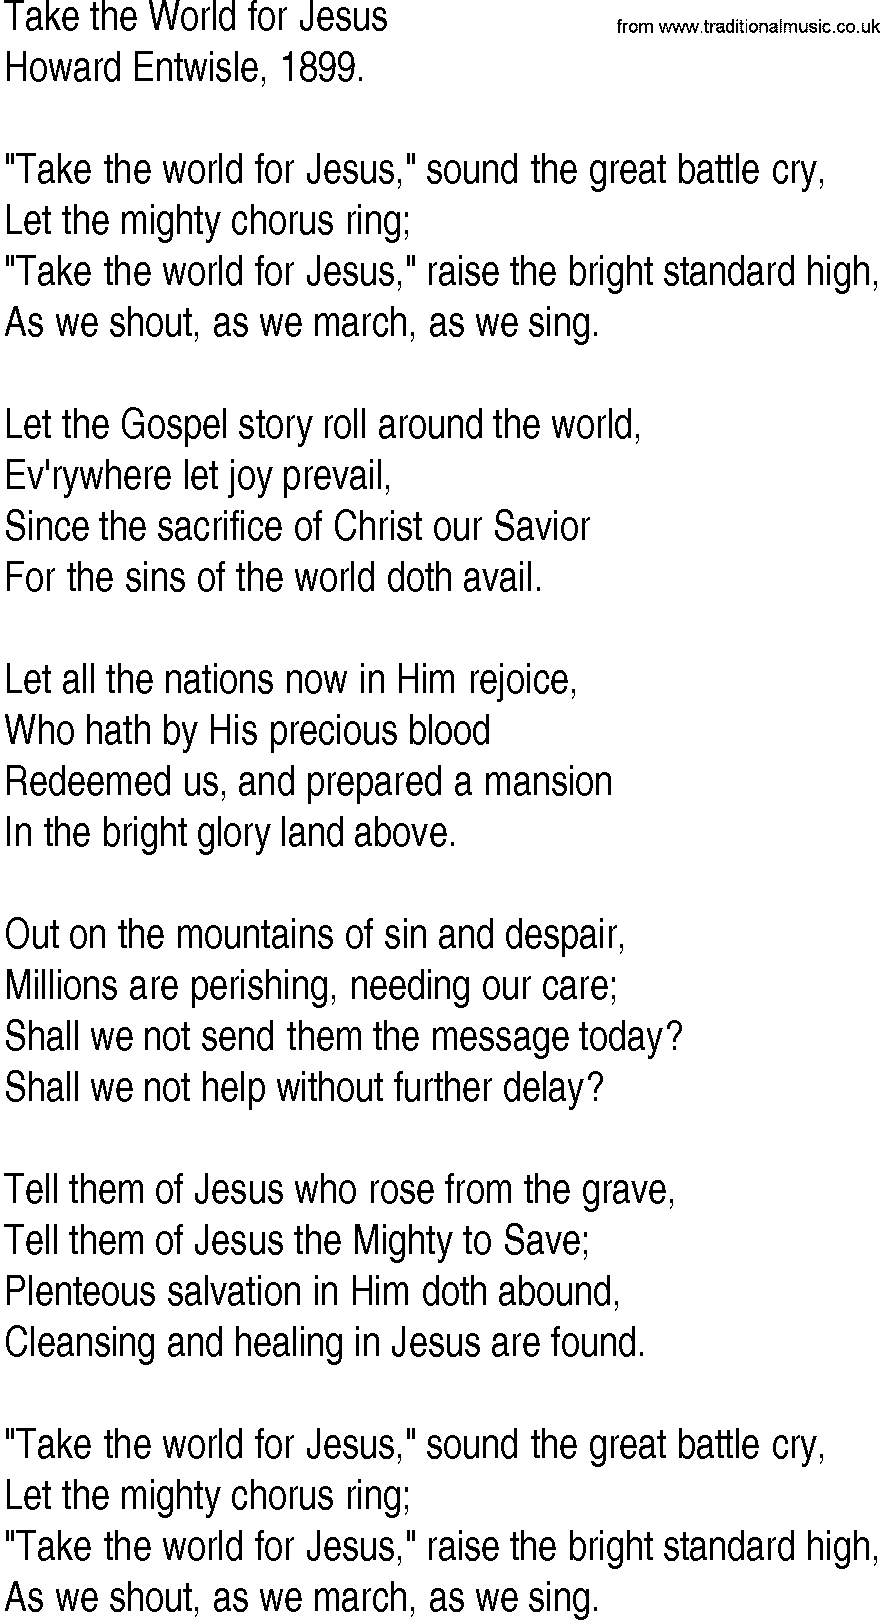 Hymn and Gospel Song: Take the World for Jesus by Howard Entwisle lyrics